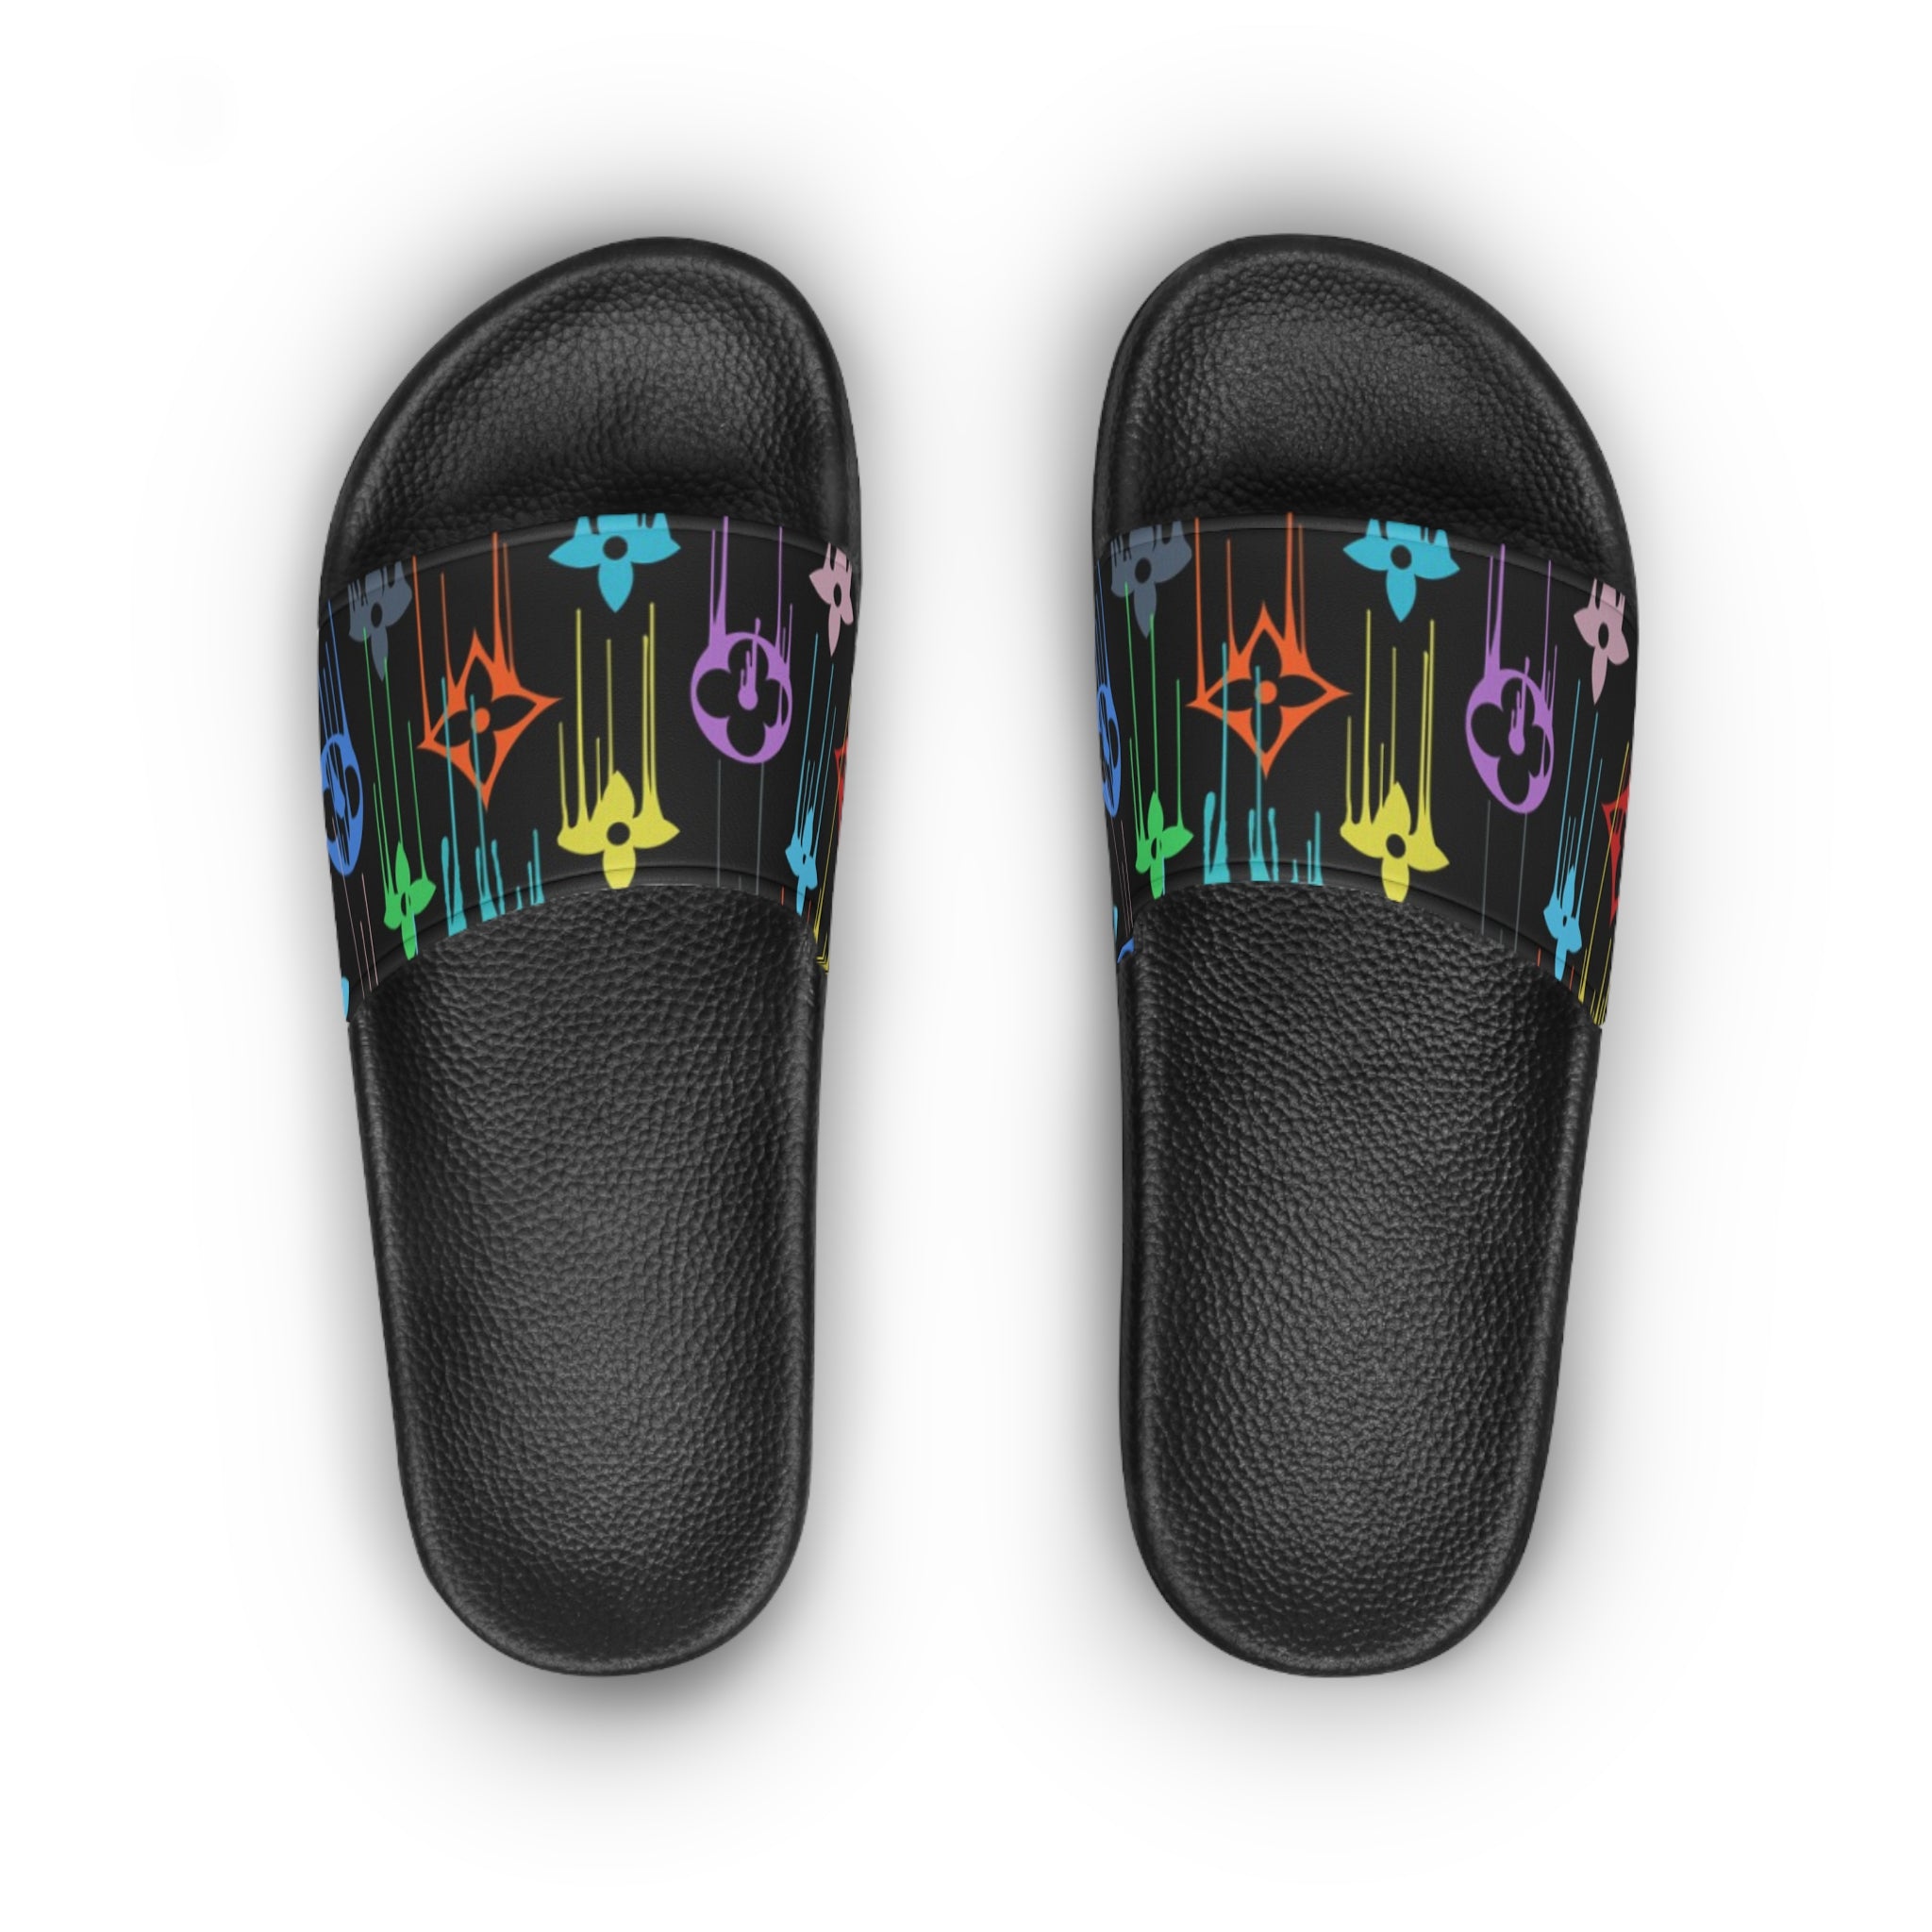  Casual Wear Collection in Multi-Color Dripping Icons Women's Slide Sandals, Slide Sandals for Women, Plaid Slip Ons SandalsBlacksoleUS7